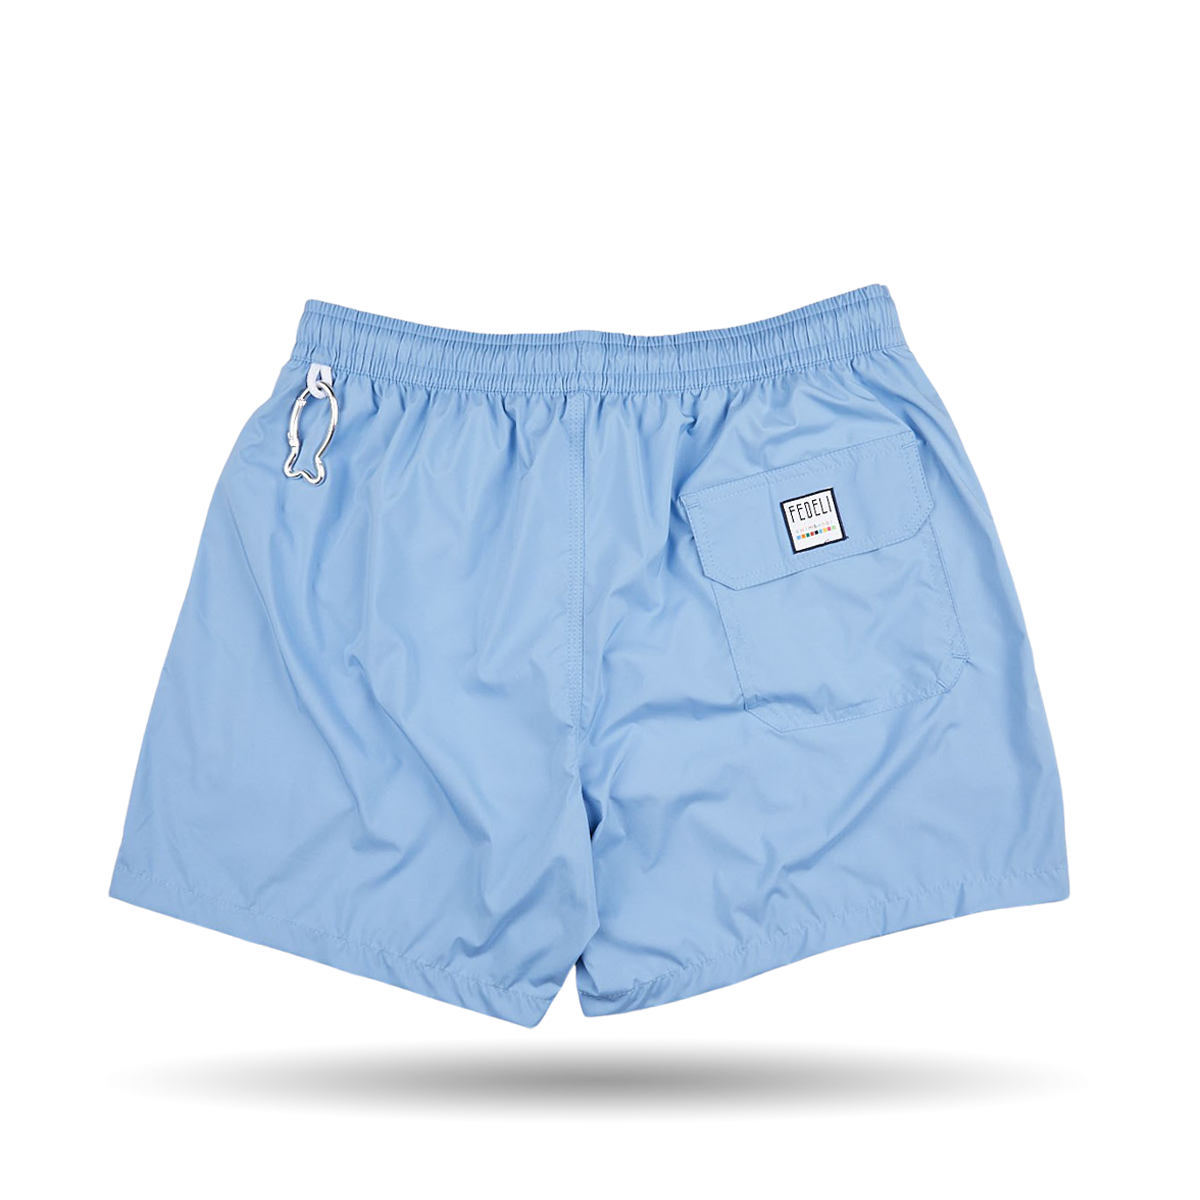 A Light Blue Microfiber Madeira Swim Short with a white Fedeli logo, perfect for luxury casual wear.